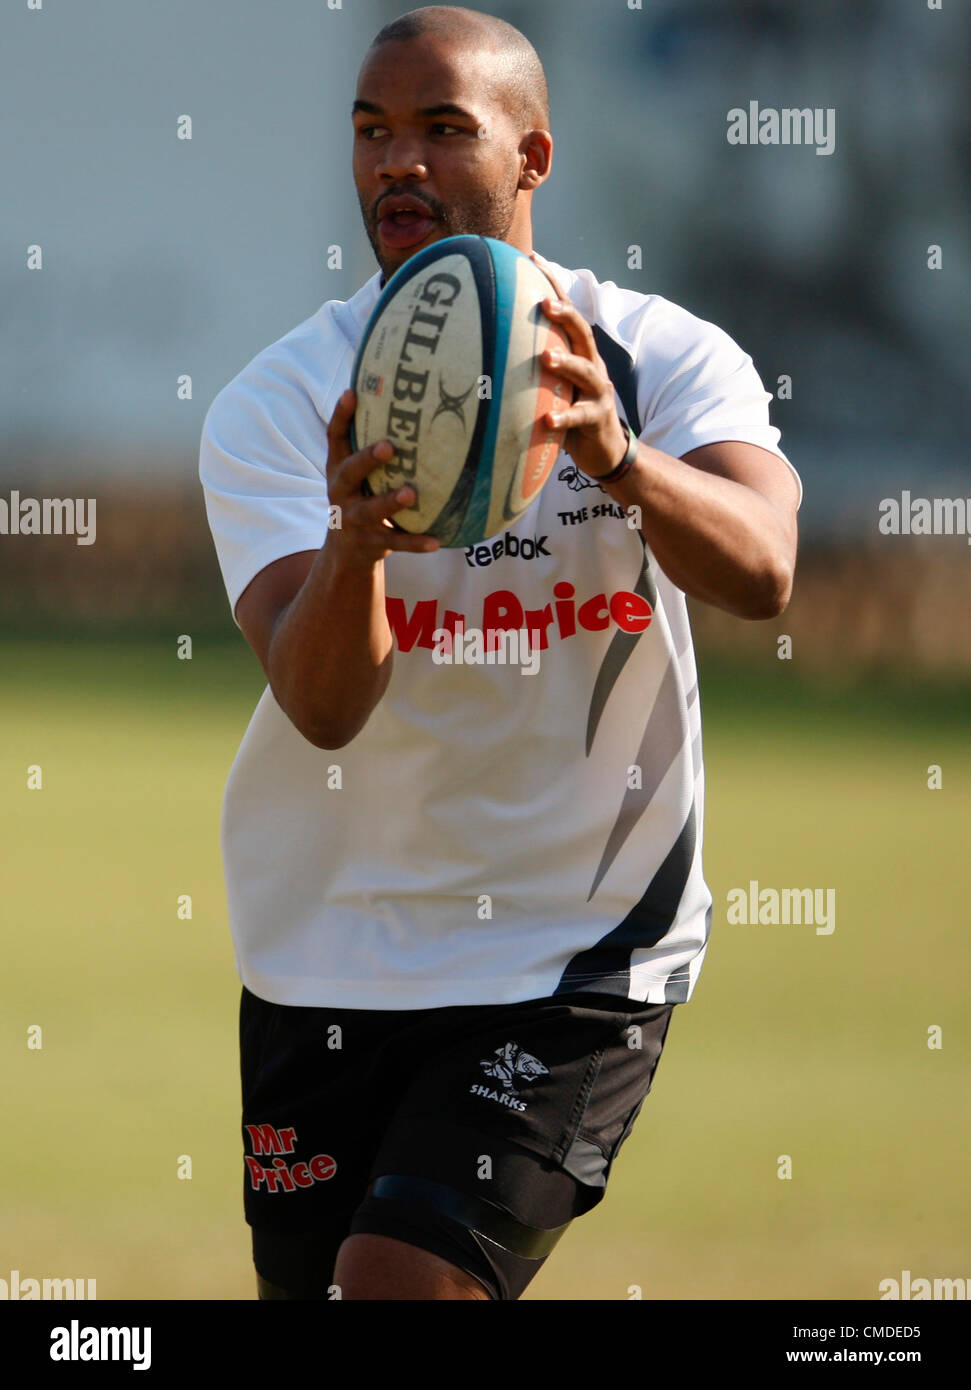 DURBAN, SOUTH AFRICA - JULY 24, JP Pietersen during The Sharks training session and press conference at Mr Price Kings Park on July 24, 2012 in Durban, South Africa Photo by Steve Haag / Gallo Images Stock Photo